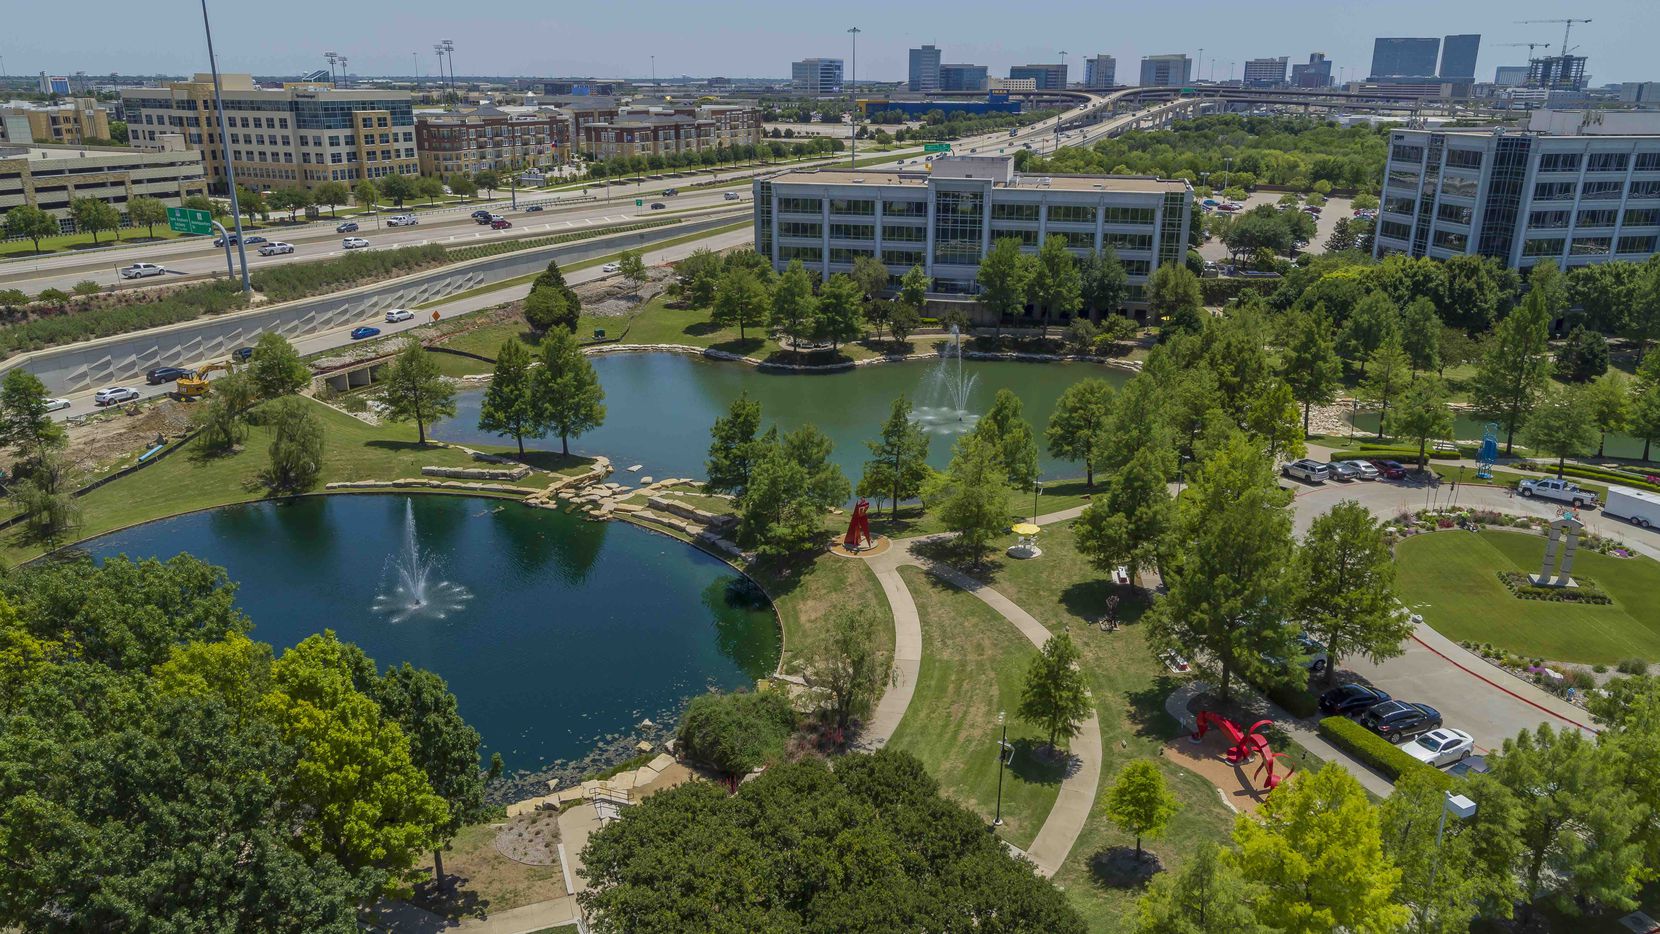 Hall Park will serve as home to Frisco's emerging performing arts center.